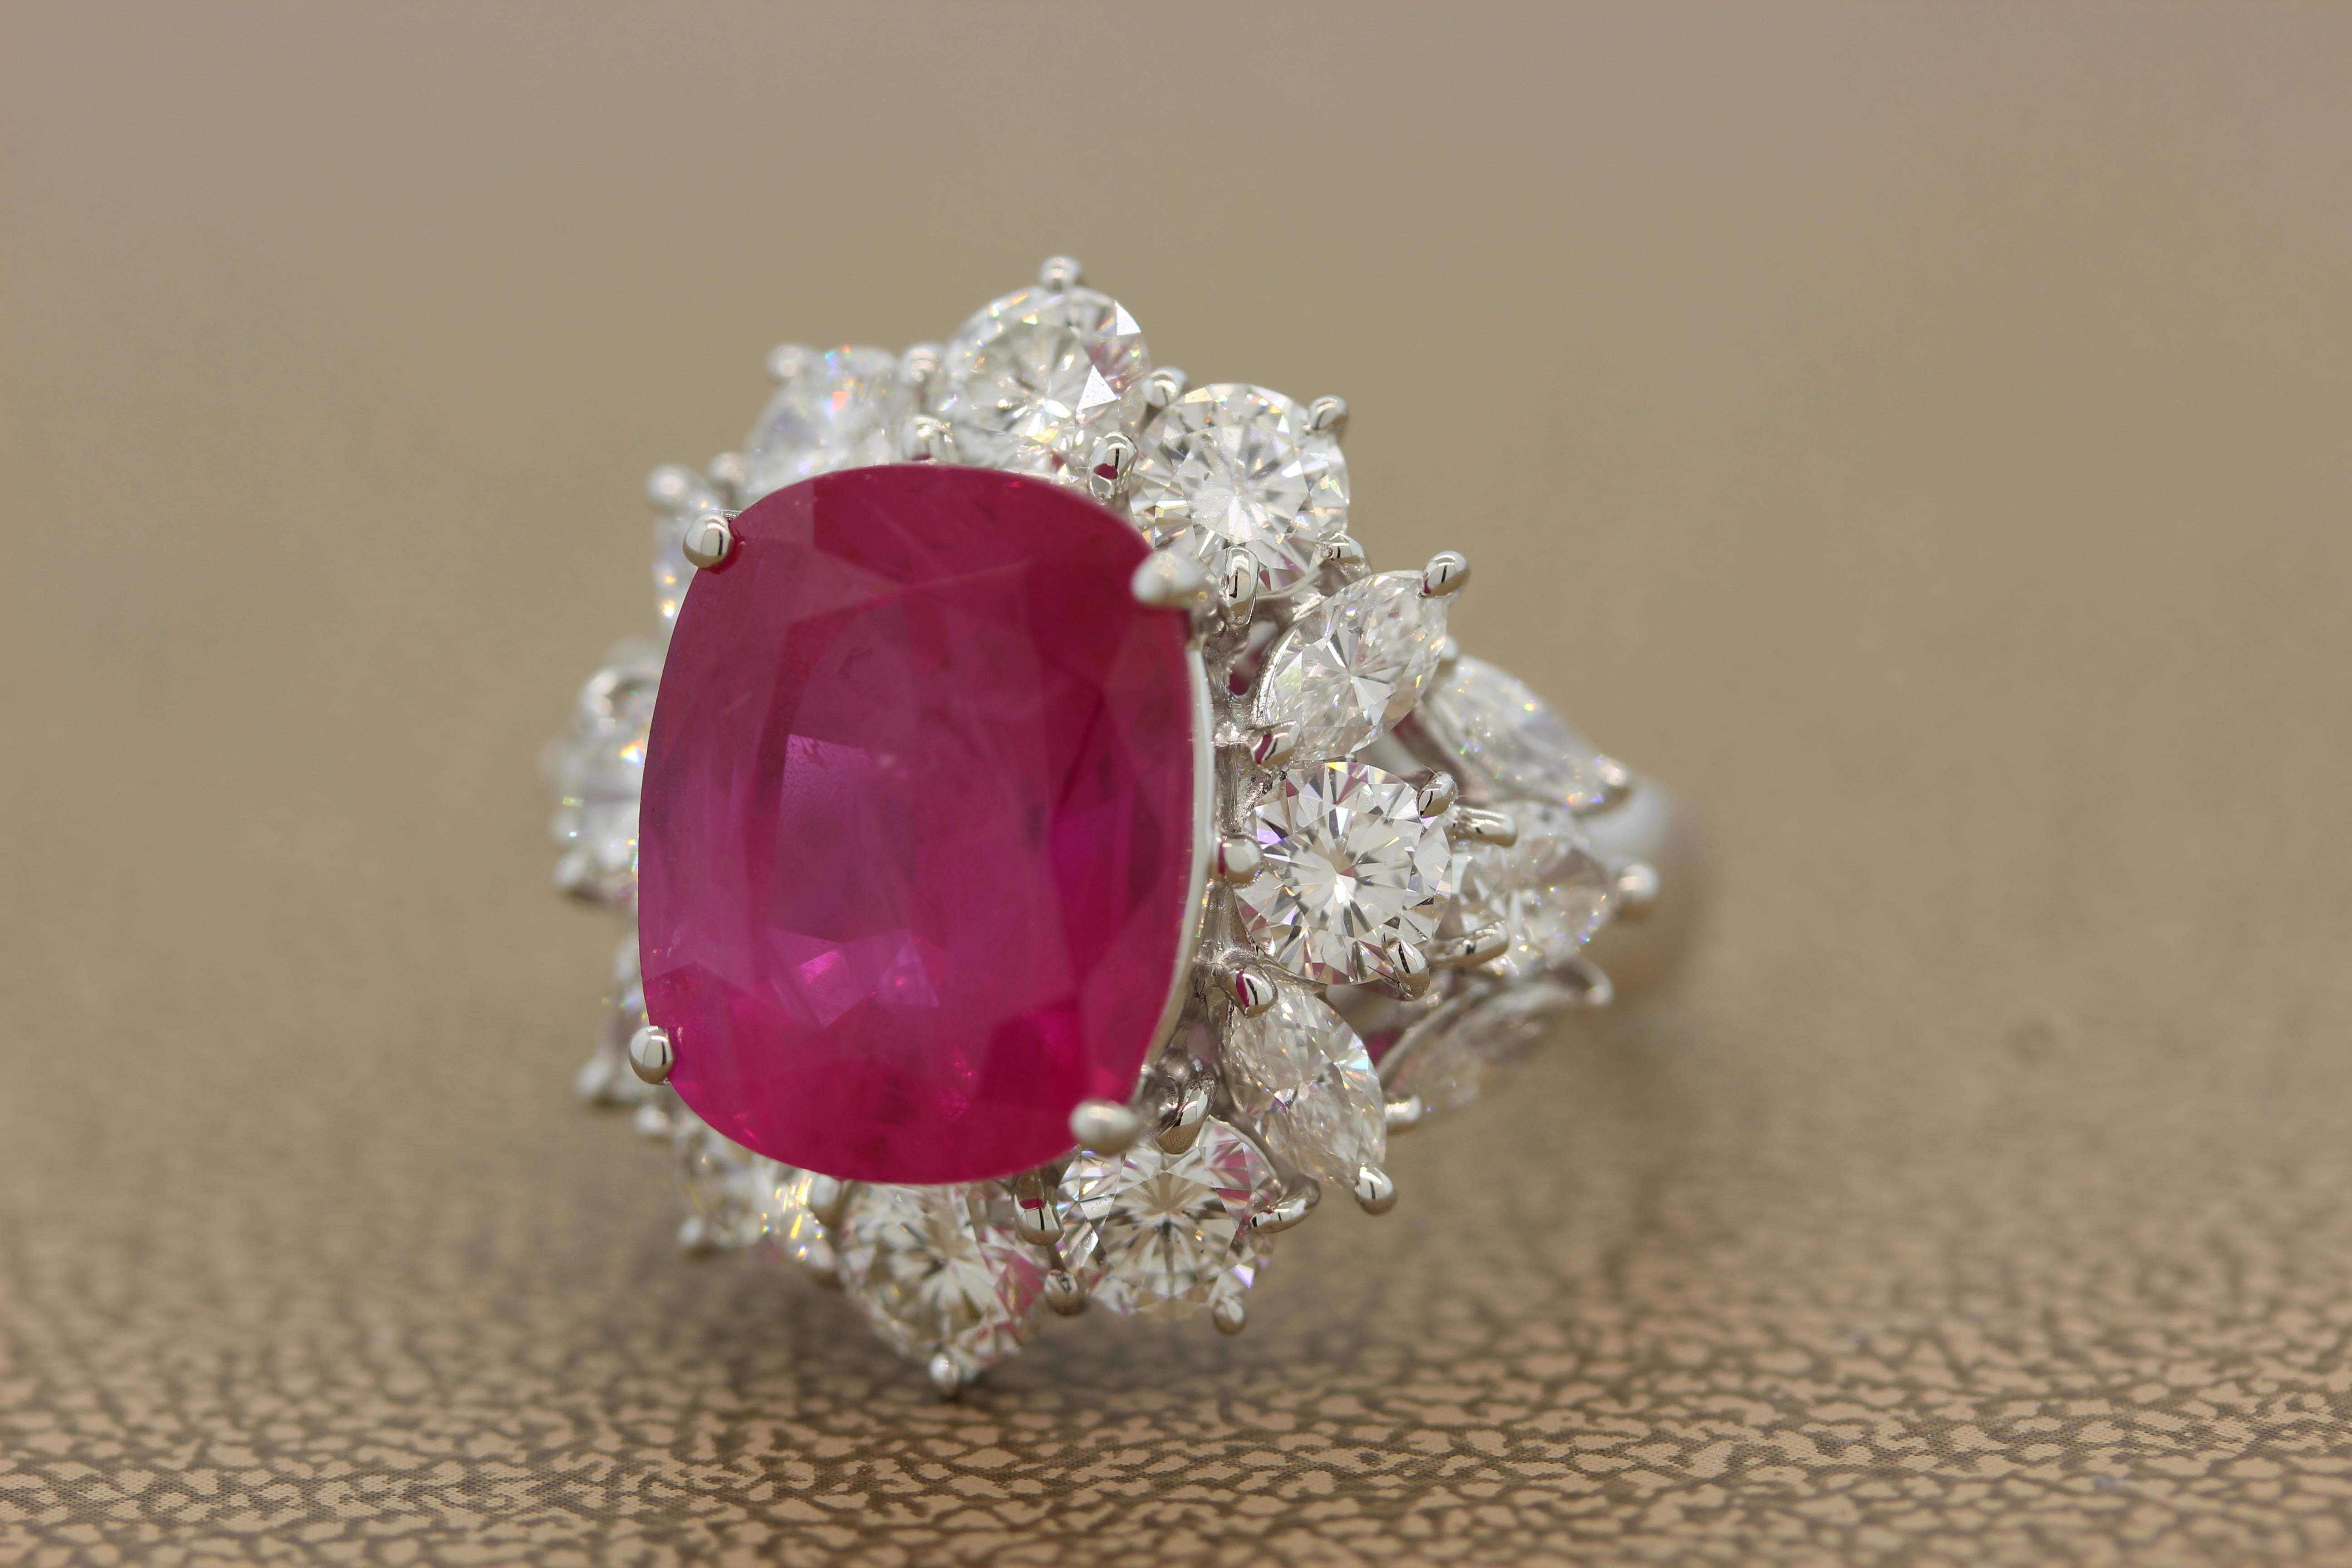 An exquisite ring featuring an AGL certified 10.27 carat pink sapphire originating from the most historic and rare source, Burma or present day Myanmar. The lavish cushion cut deep pink sapphire is haloed by 3.71 carats of colorless diamonds. The